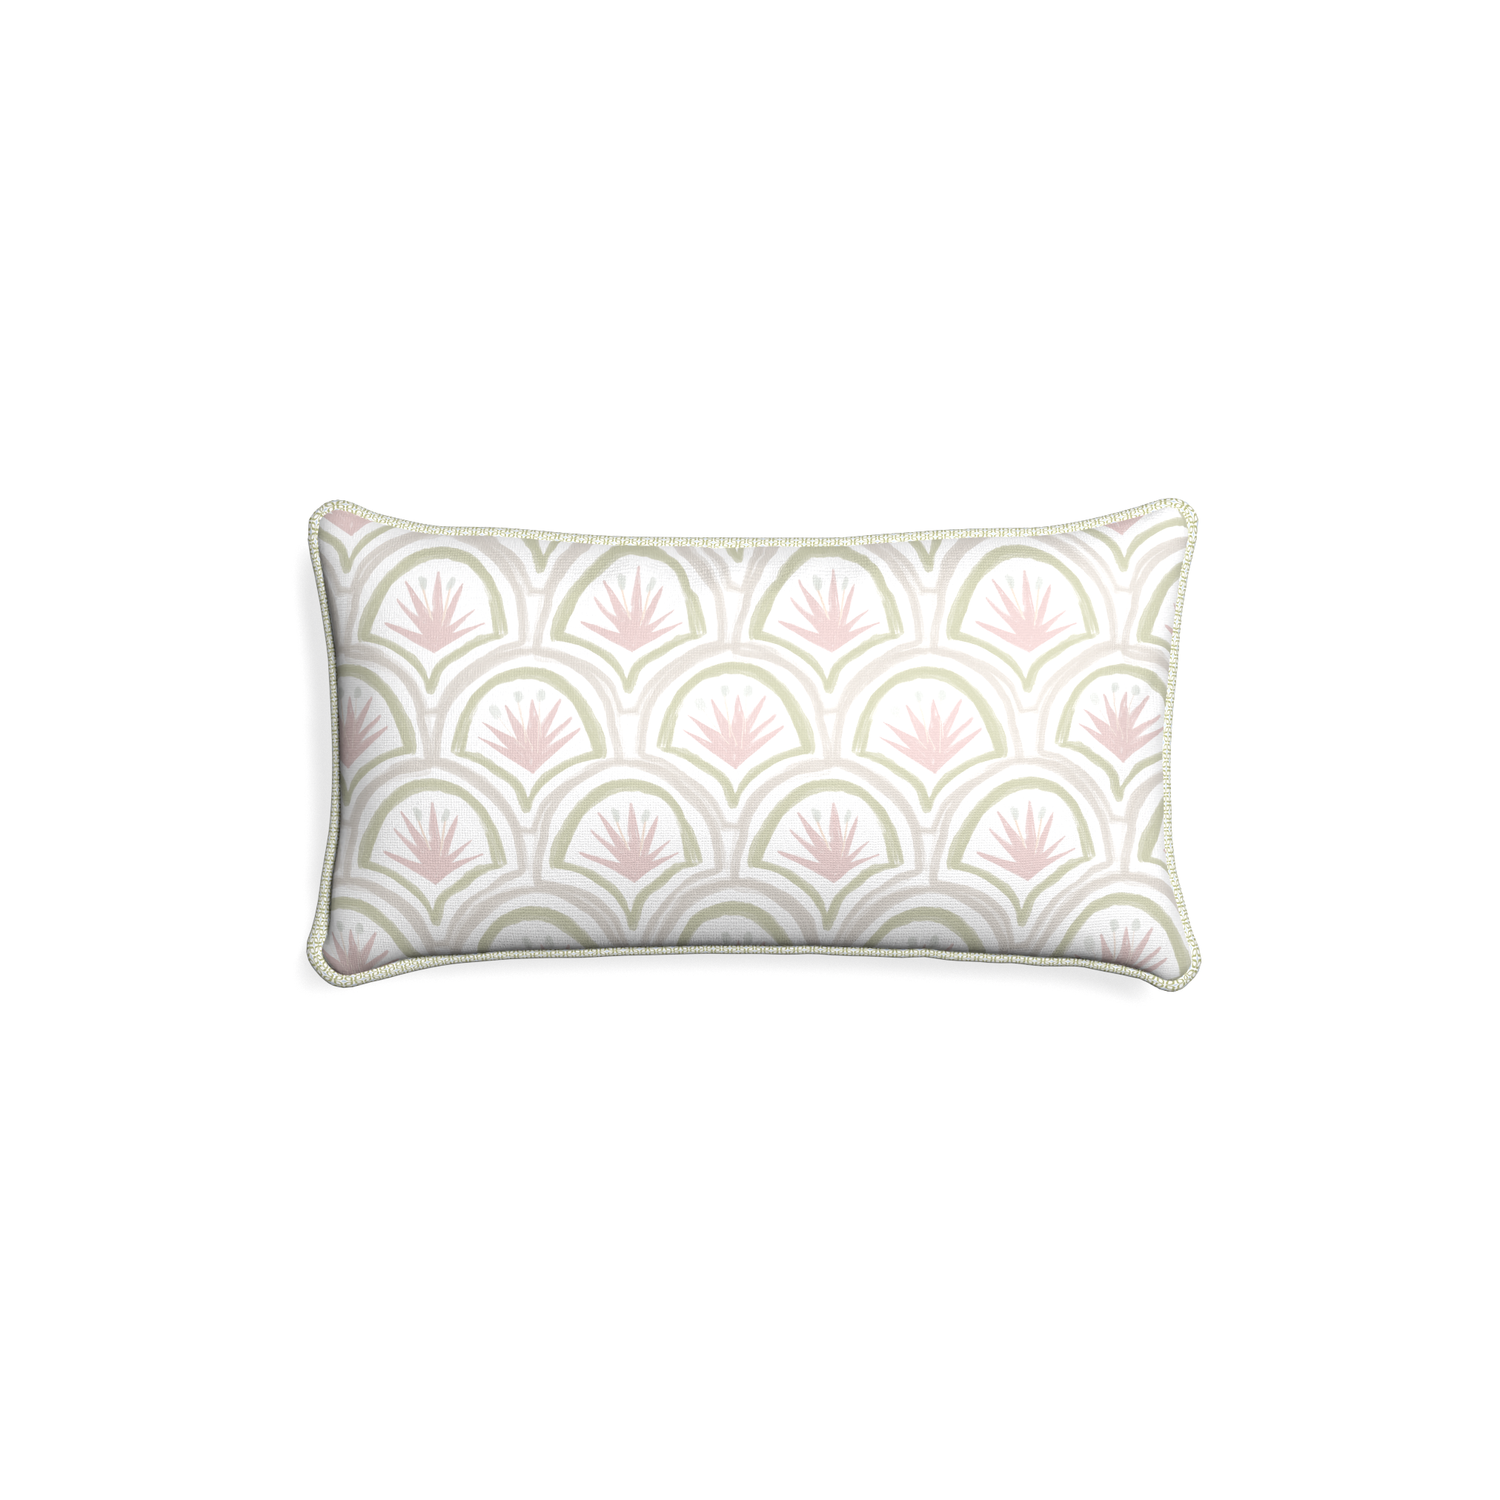 Petite-lumbar thatcher rose custom pink & green palmpillow with l piping on white background